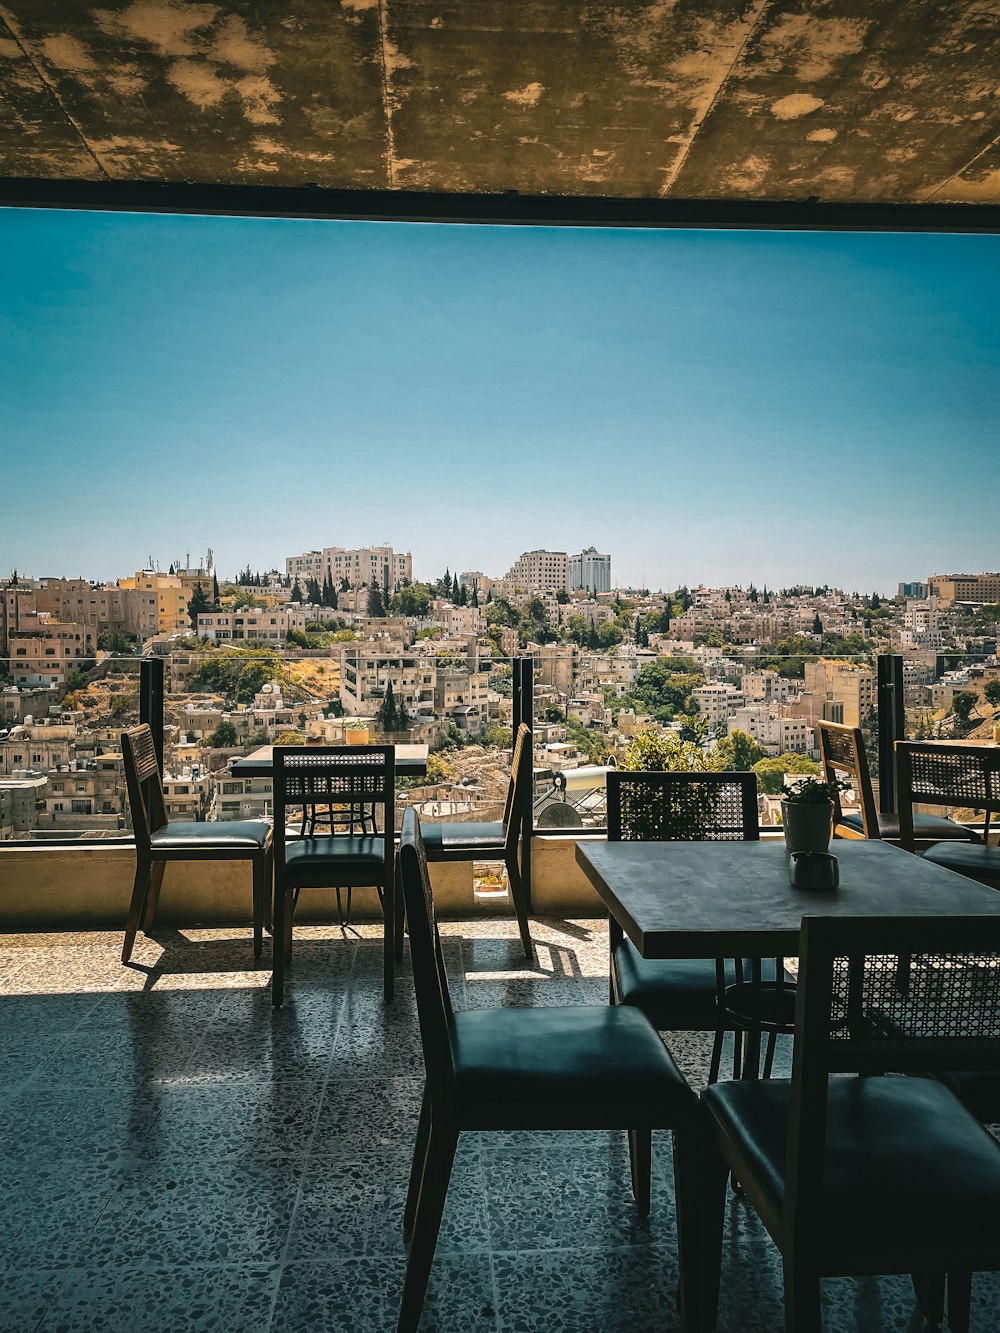 a view of a city from a restaurant